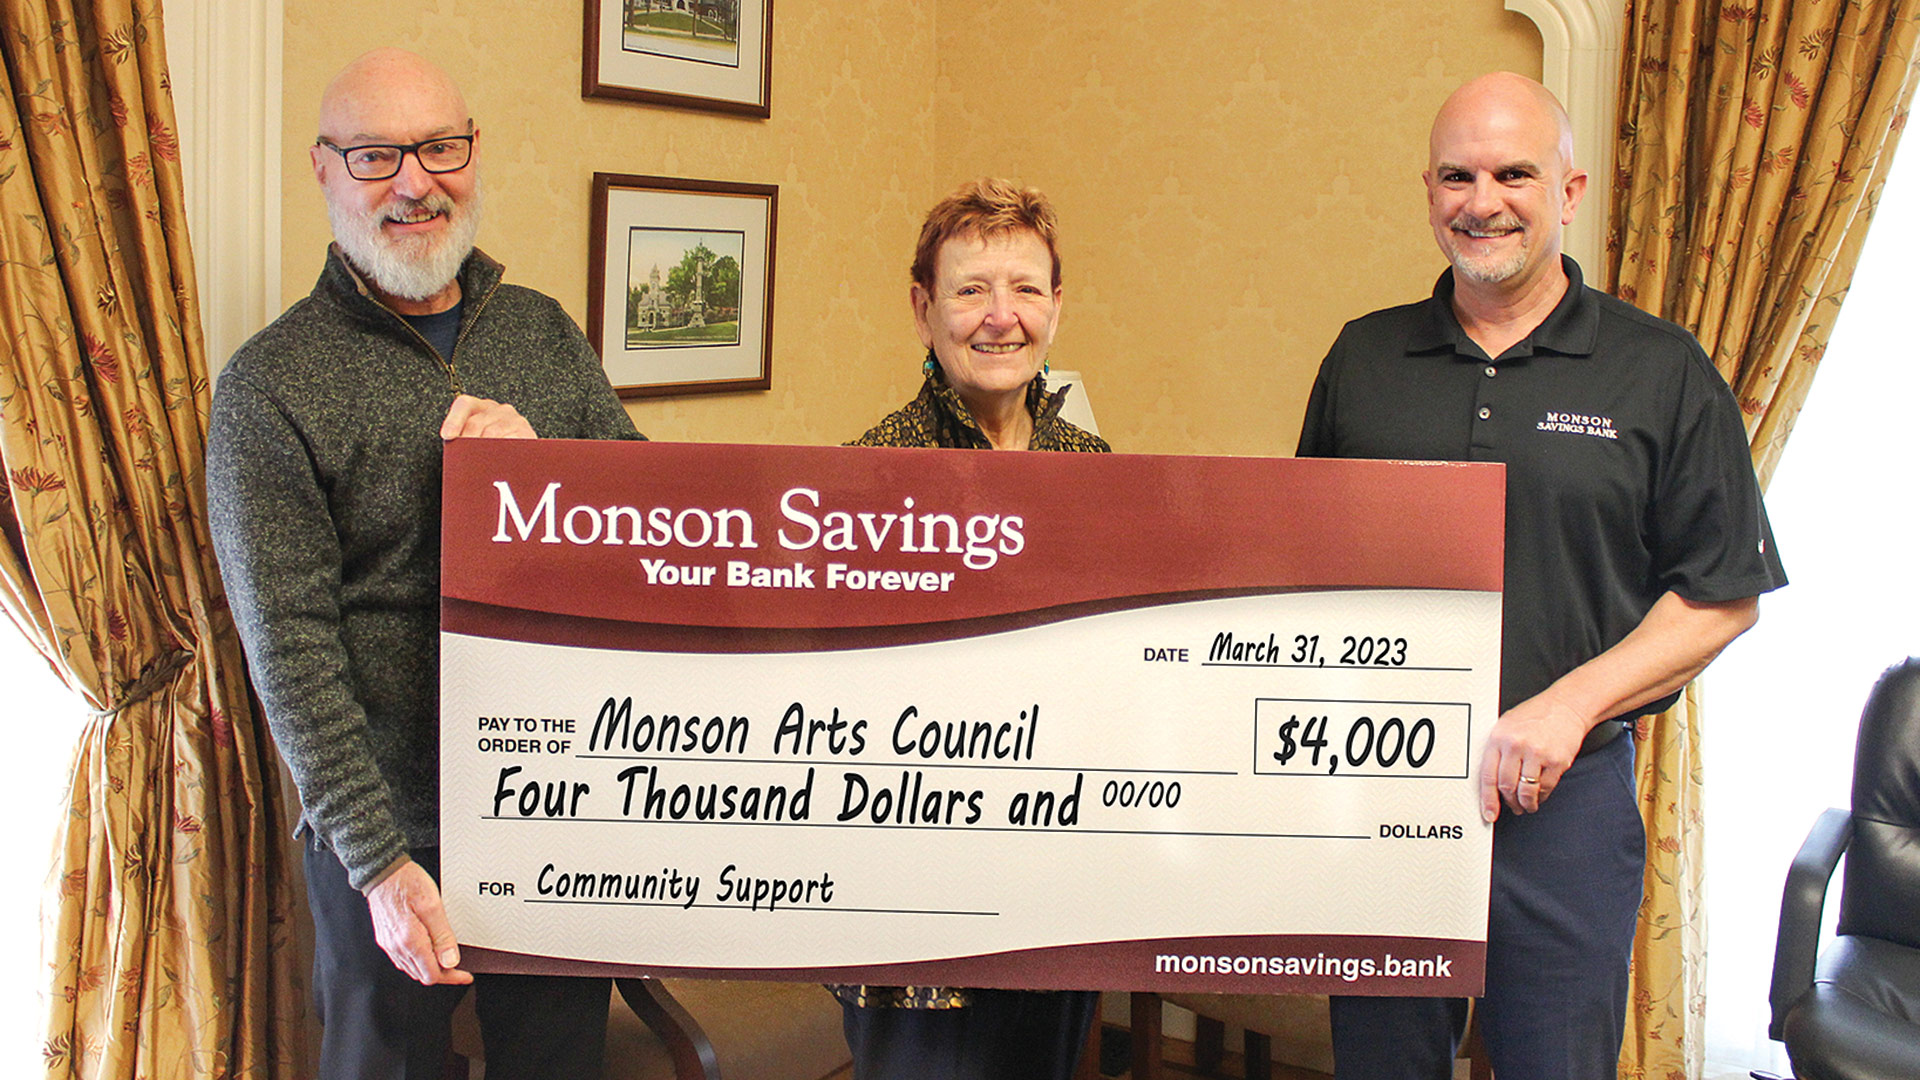 Pictured: Moriarty (right) presents the $4,000 donation to Susan James and David Dupuis of the Monson Arts Council.